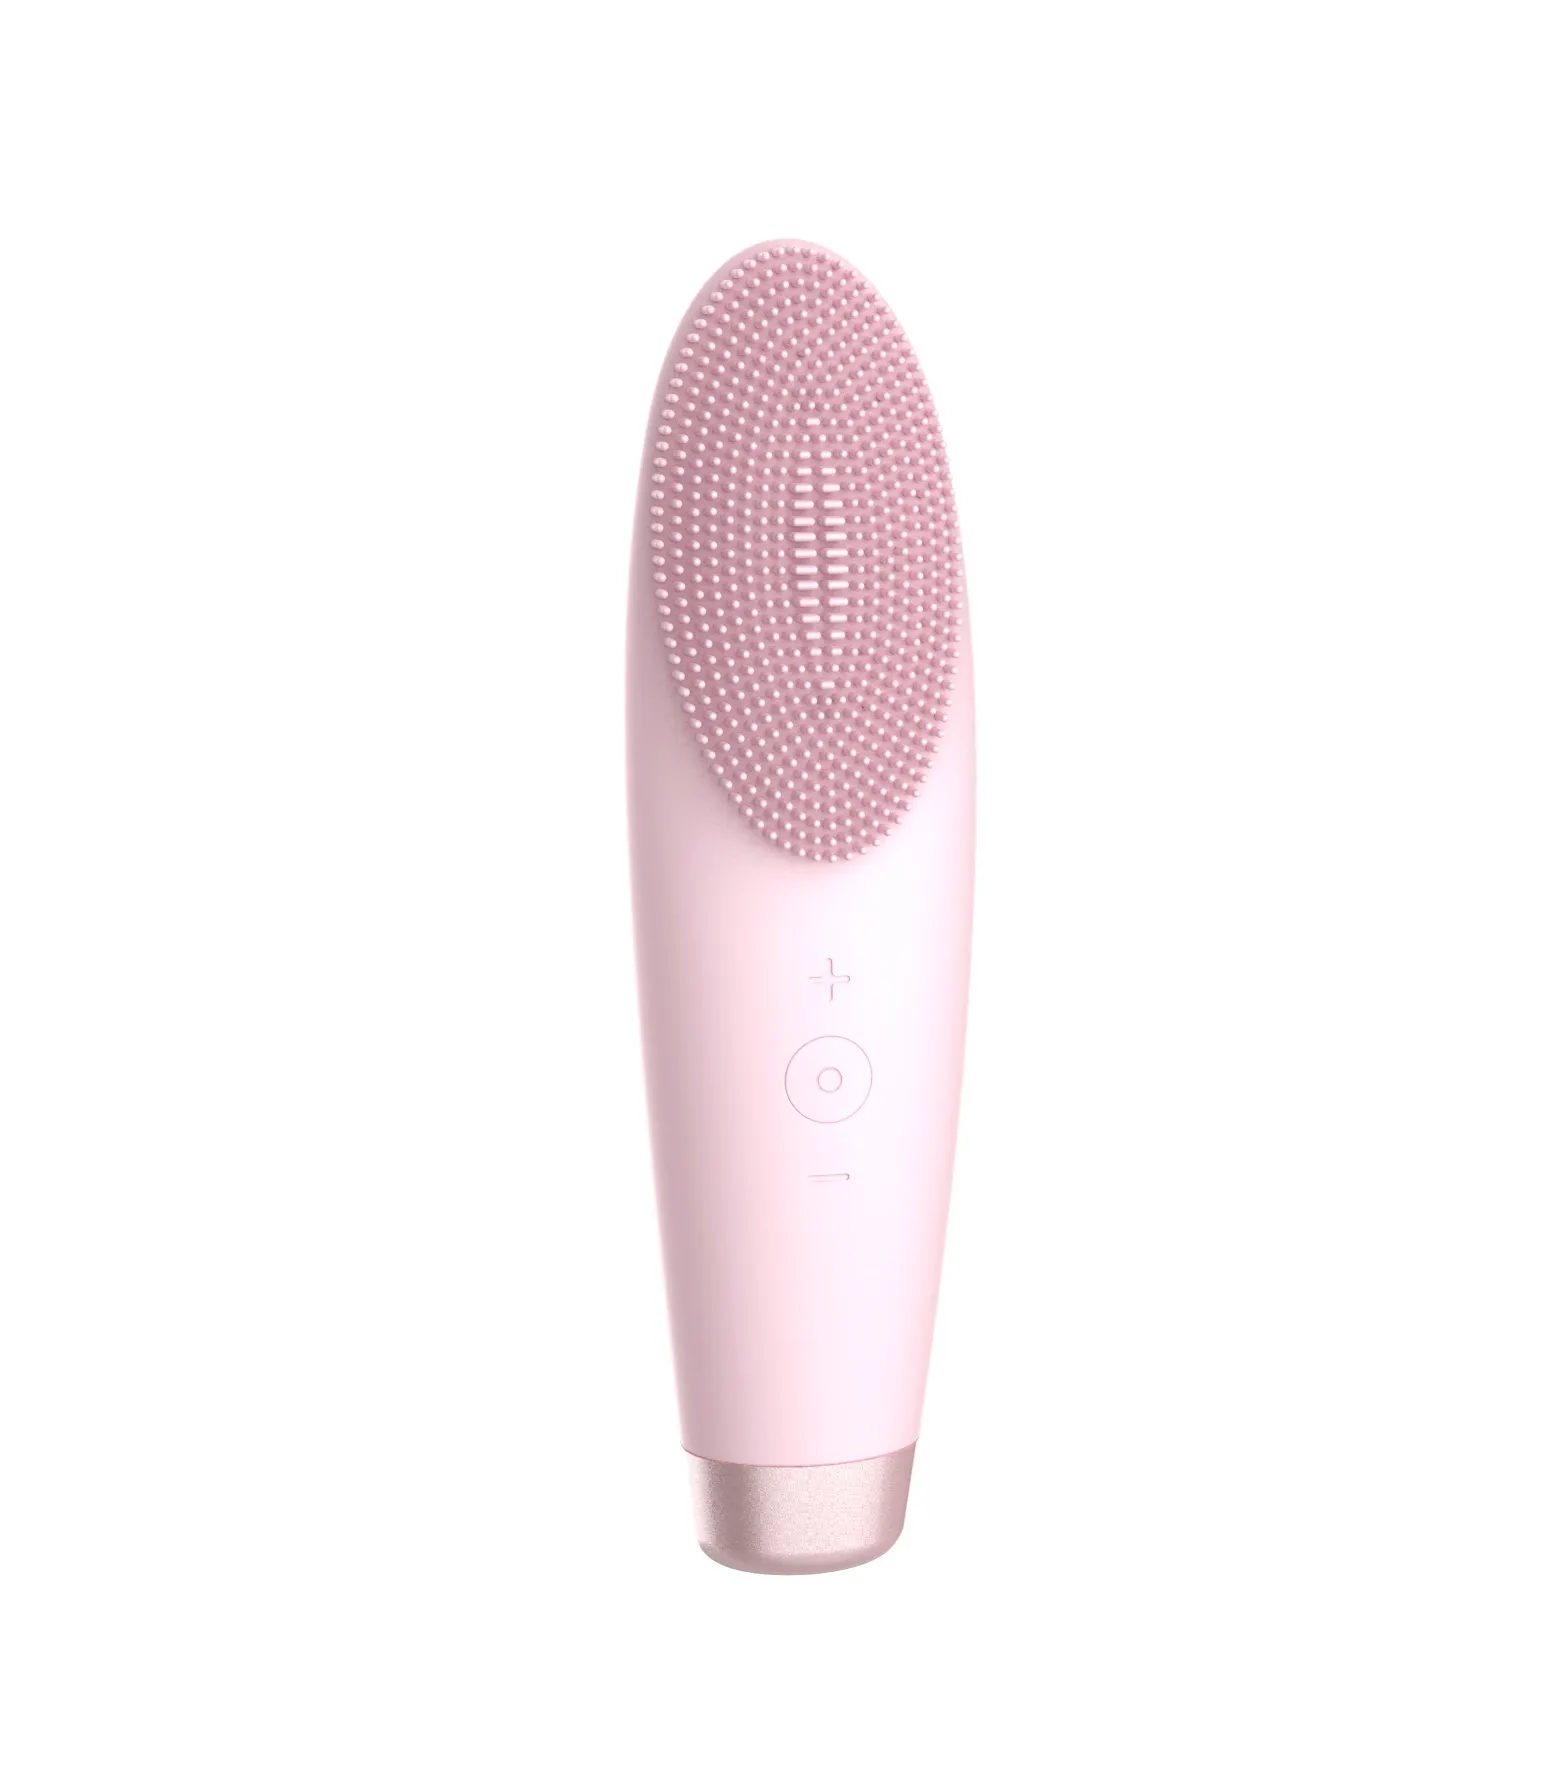 LULA Wholesale Korea Home Use Other Beauty Gift Set Equipment Silicone Electric Face Cleansing Brush Device